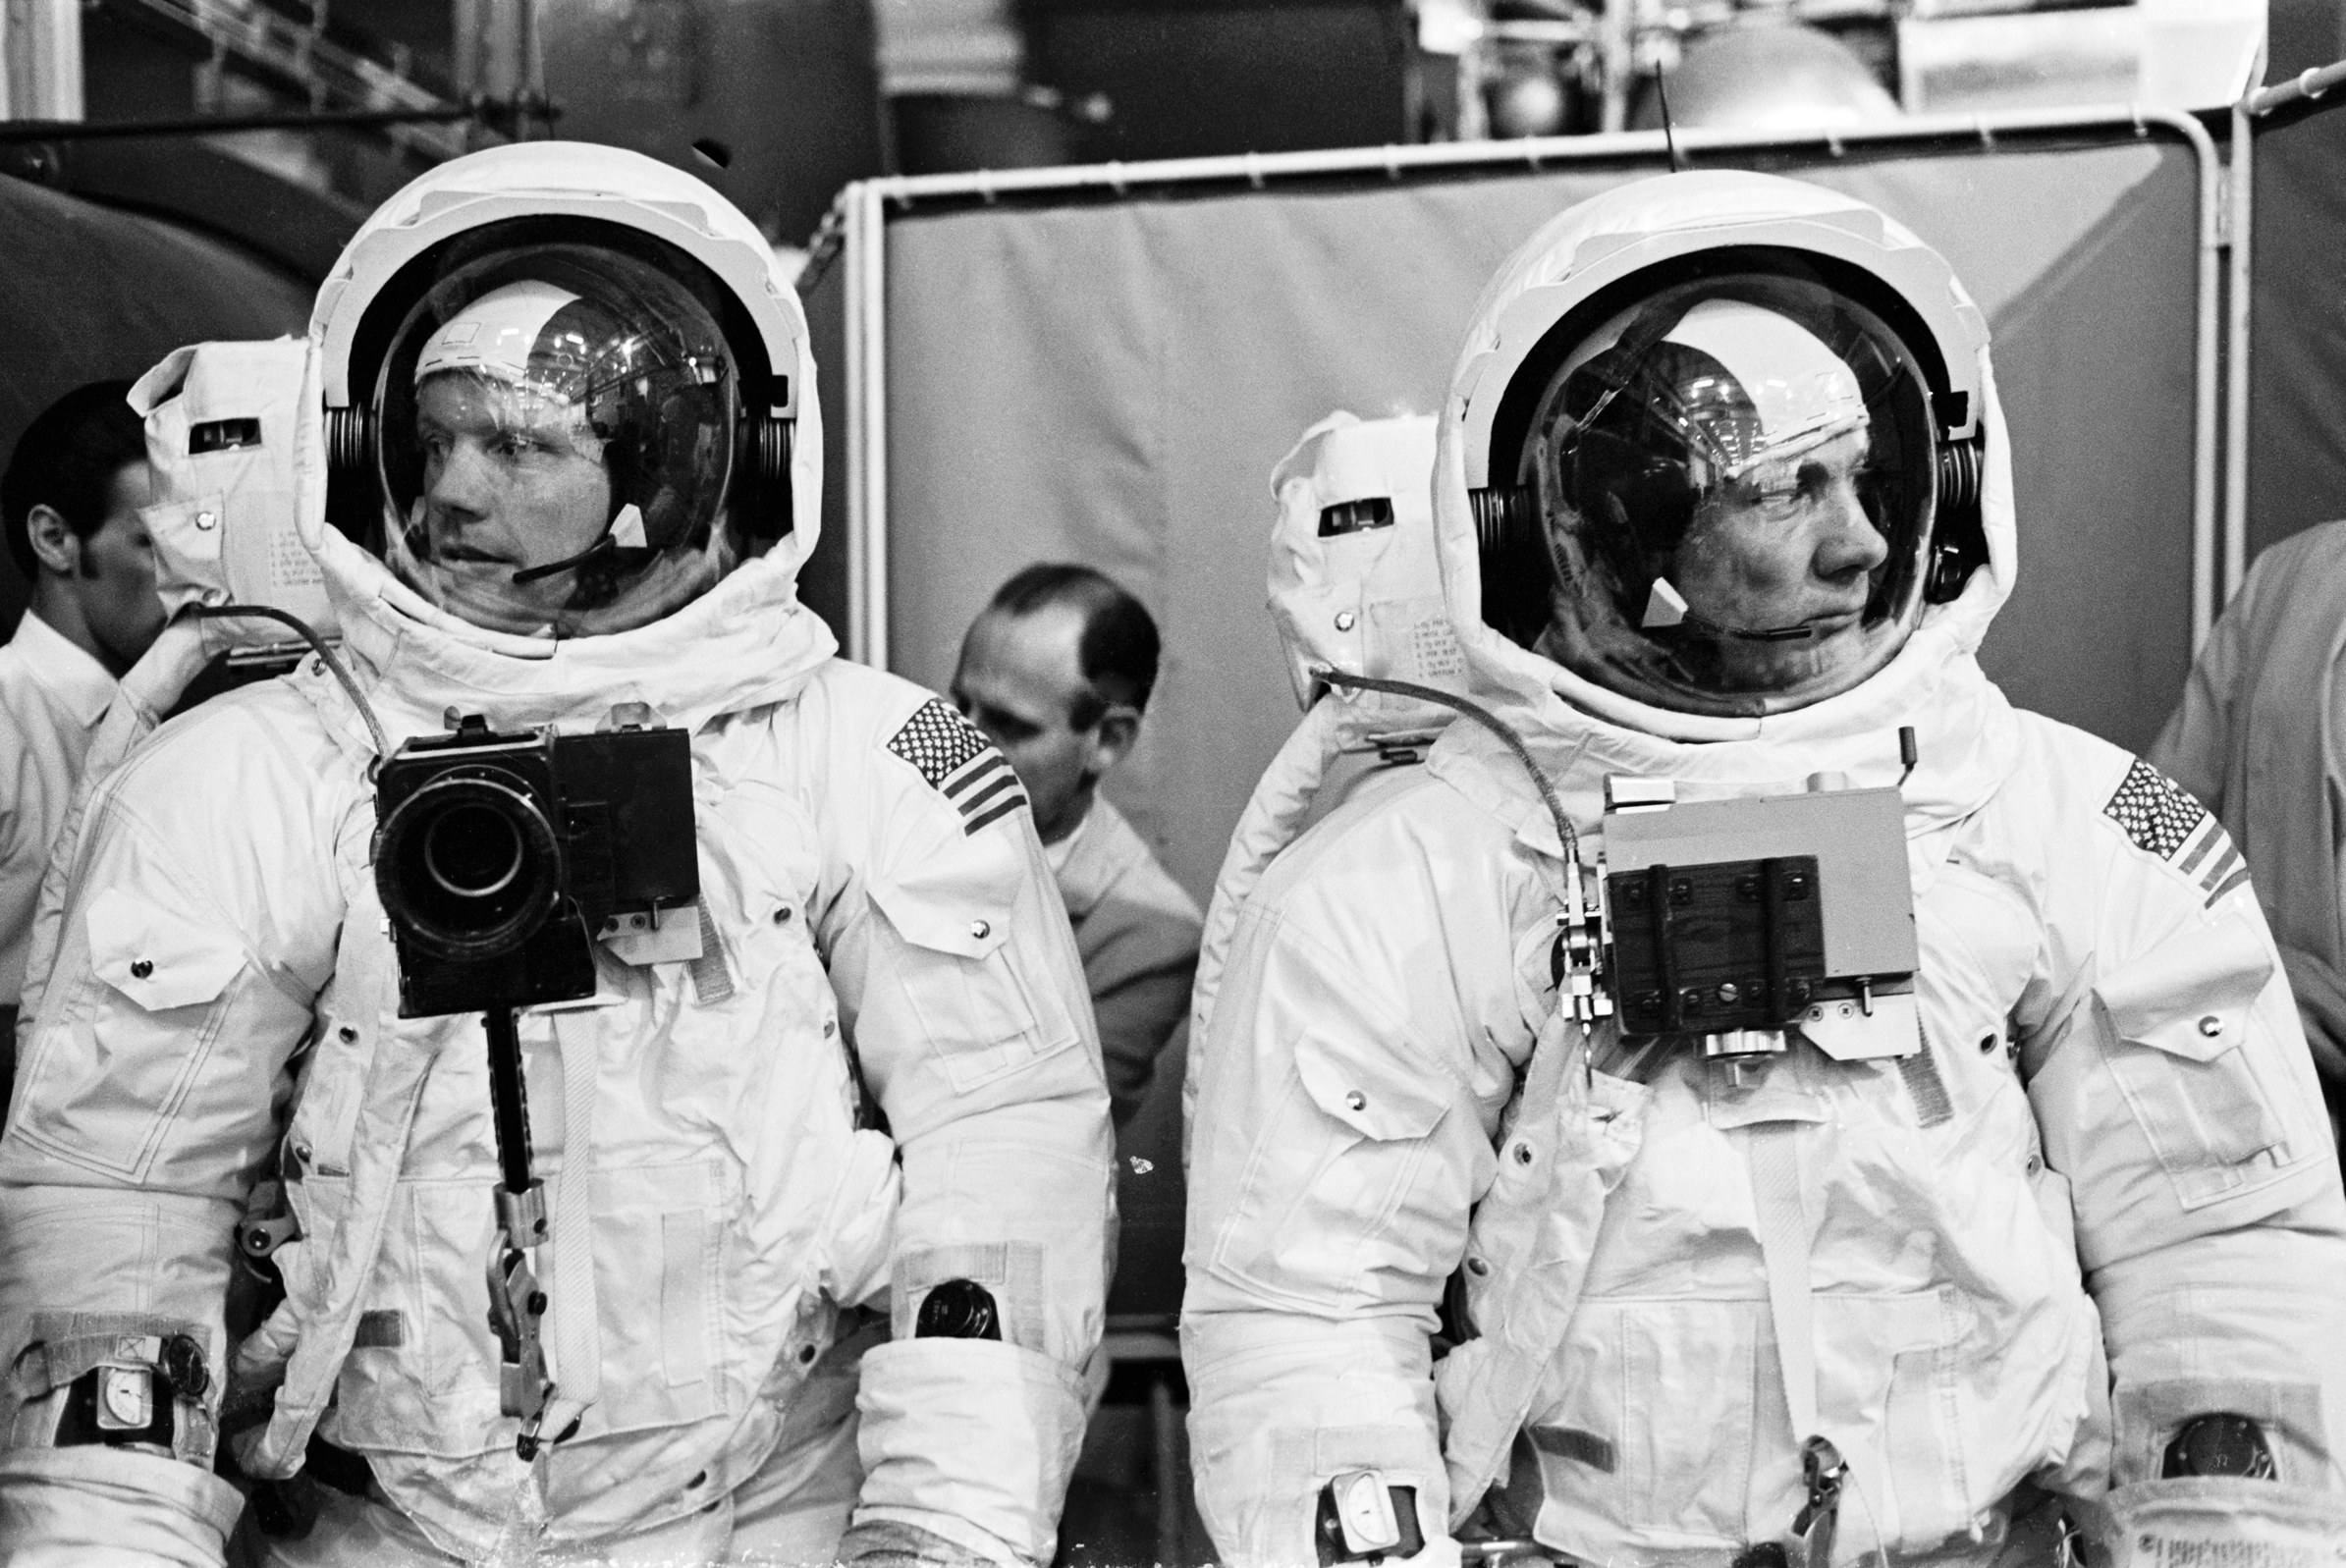 Astronauts Neil Armstrong (L) and Buzz Aldrin (R) pictured during extravehicular activity training in April 1969.